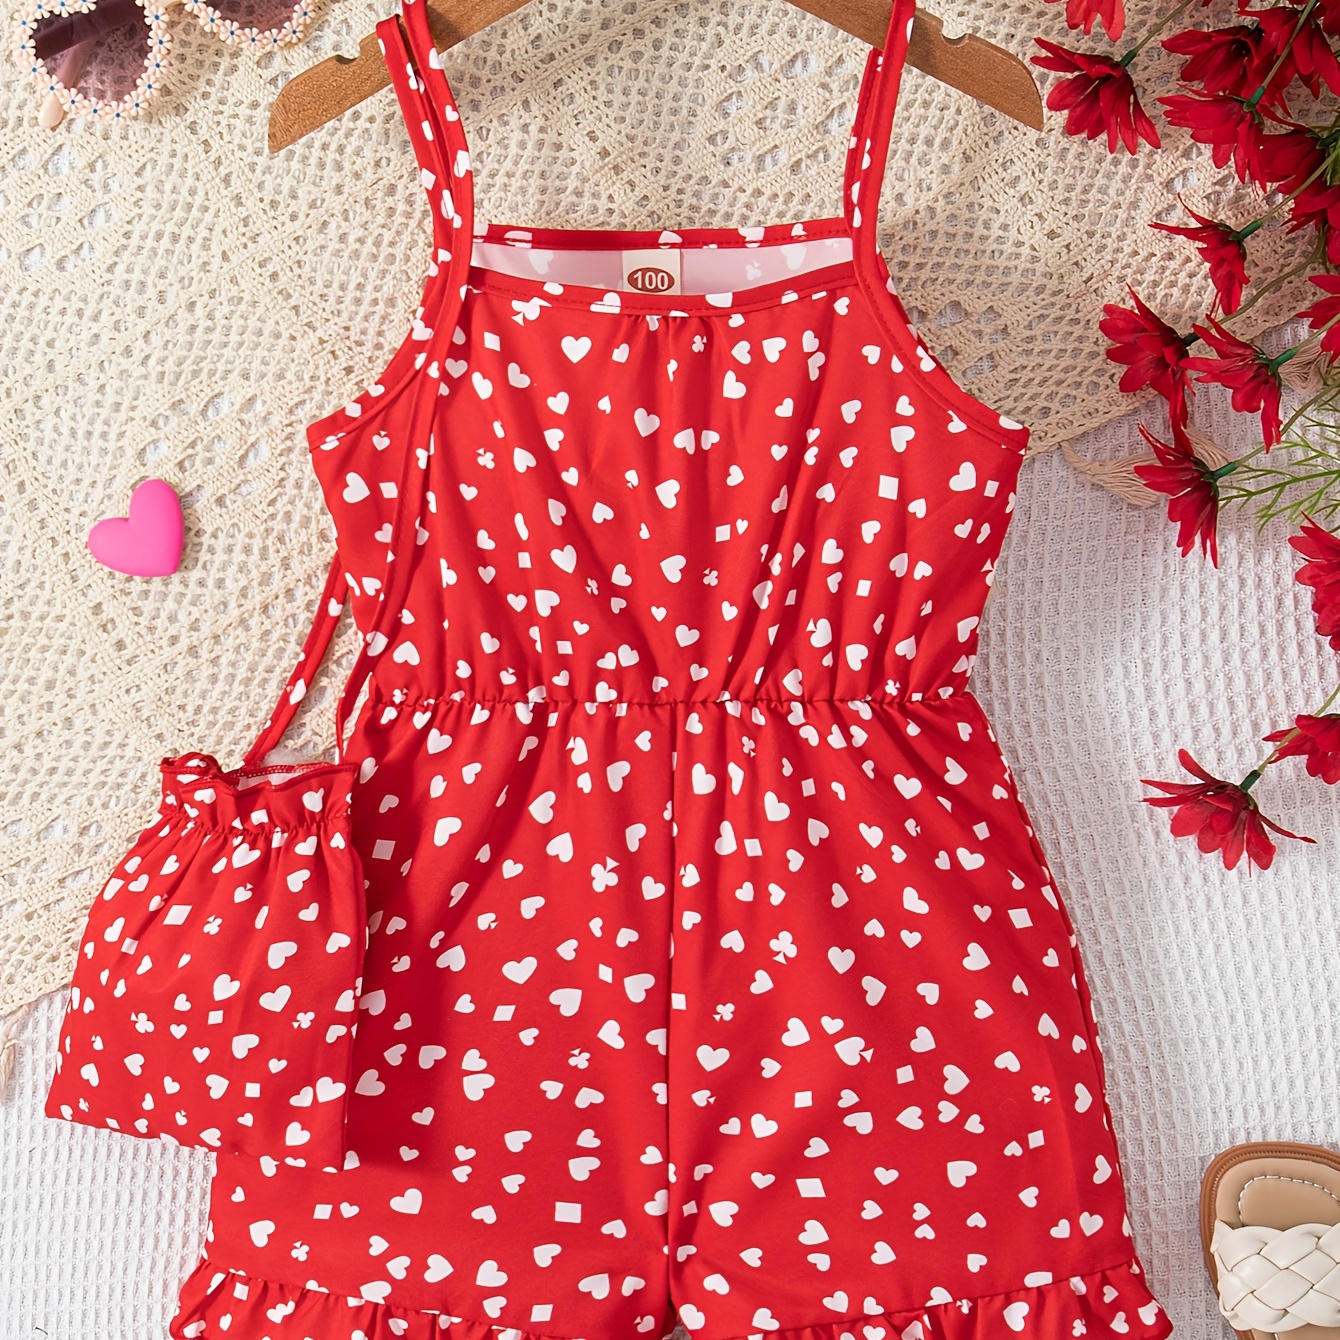 

Allover Dot Print Cami Romper With Bag For Girls, Stylish Summer Versatile Suit Outdoor Jumpsuit Holiday Gift